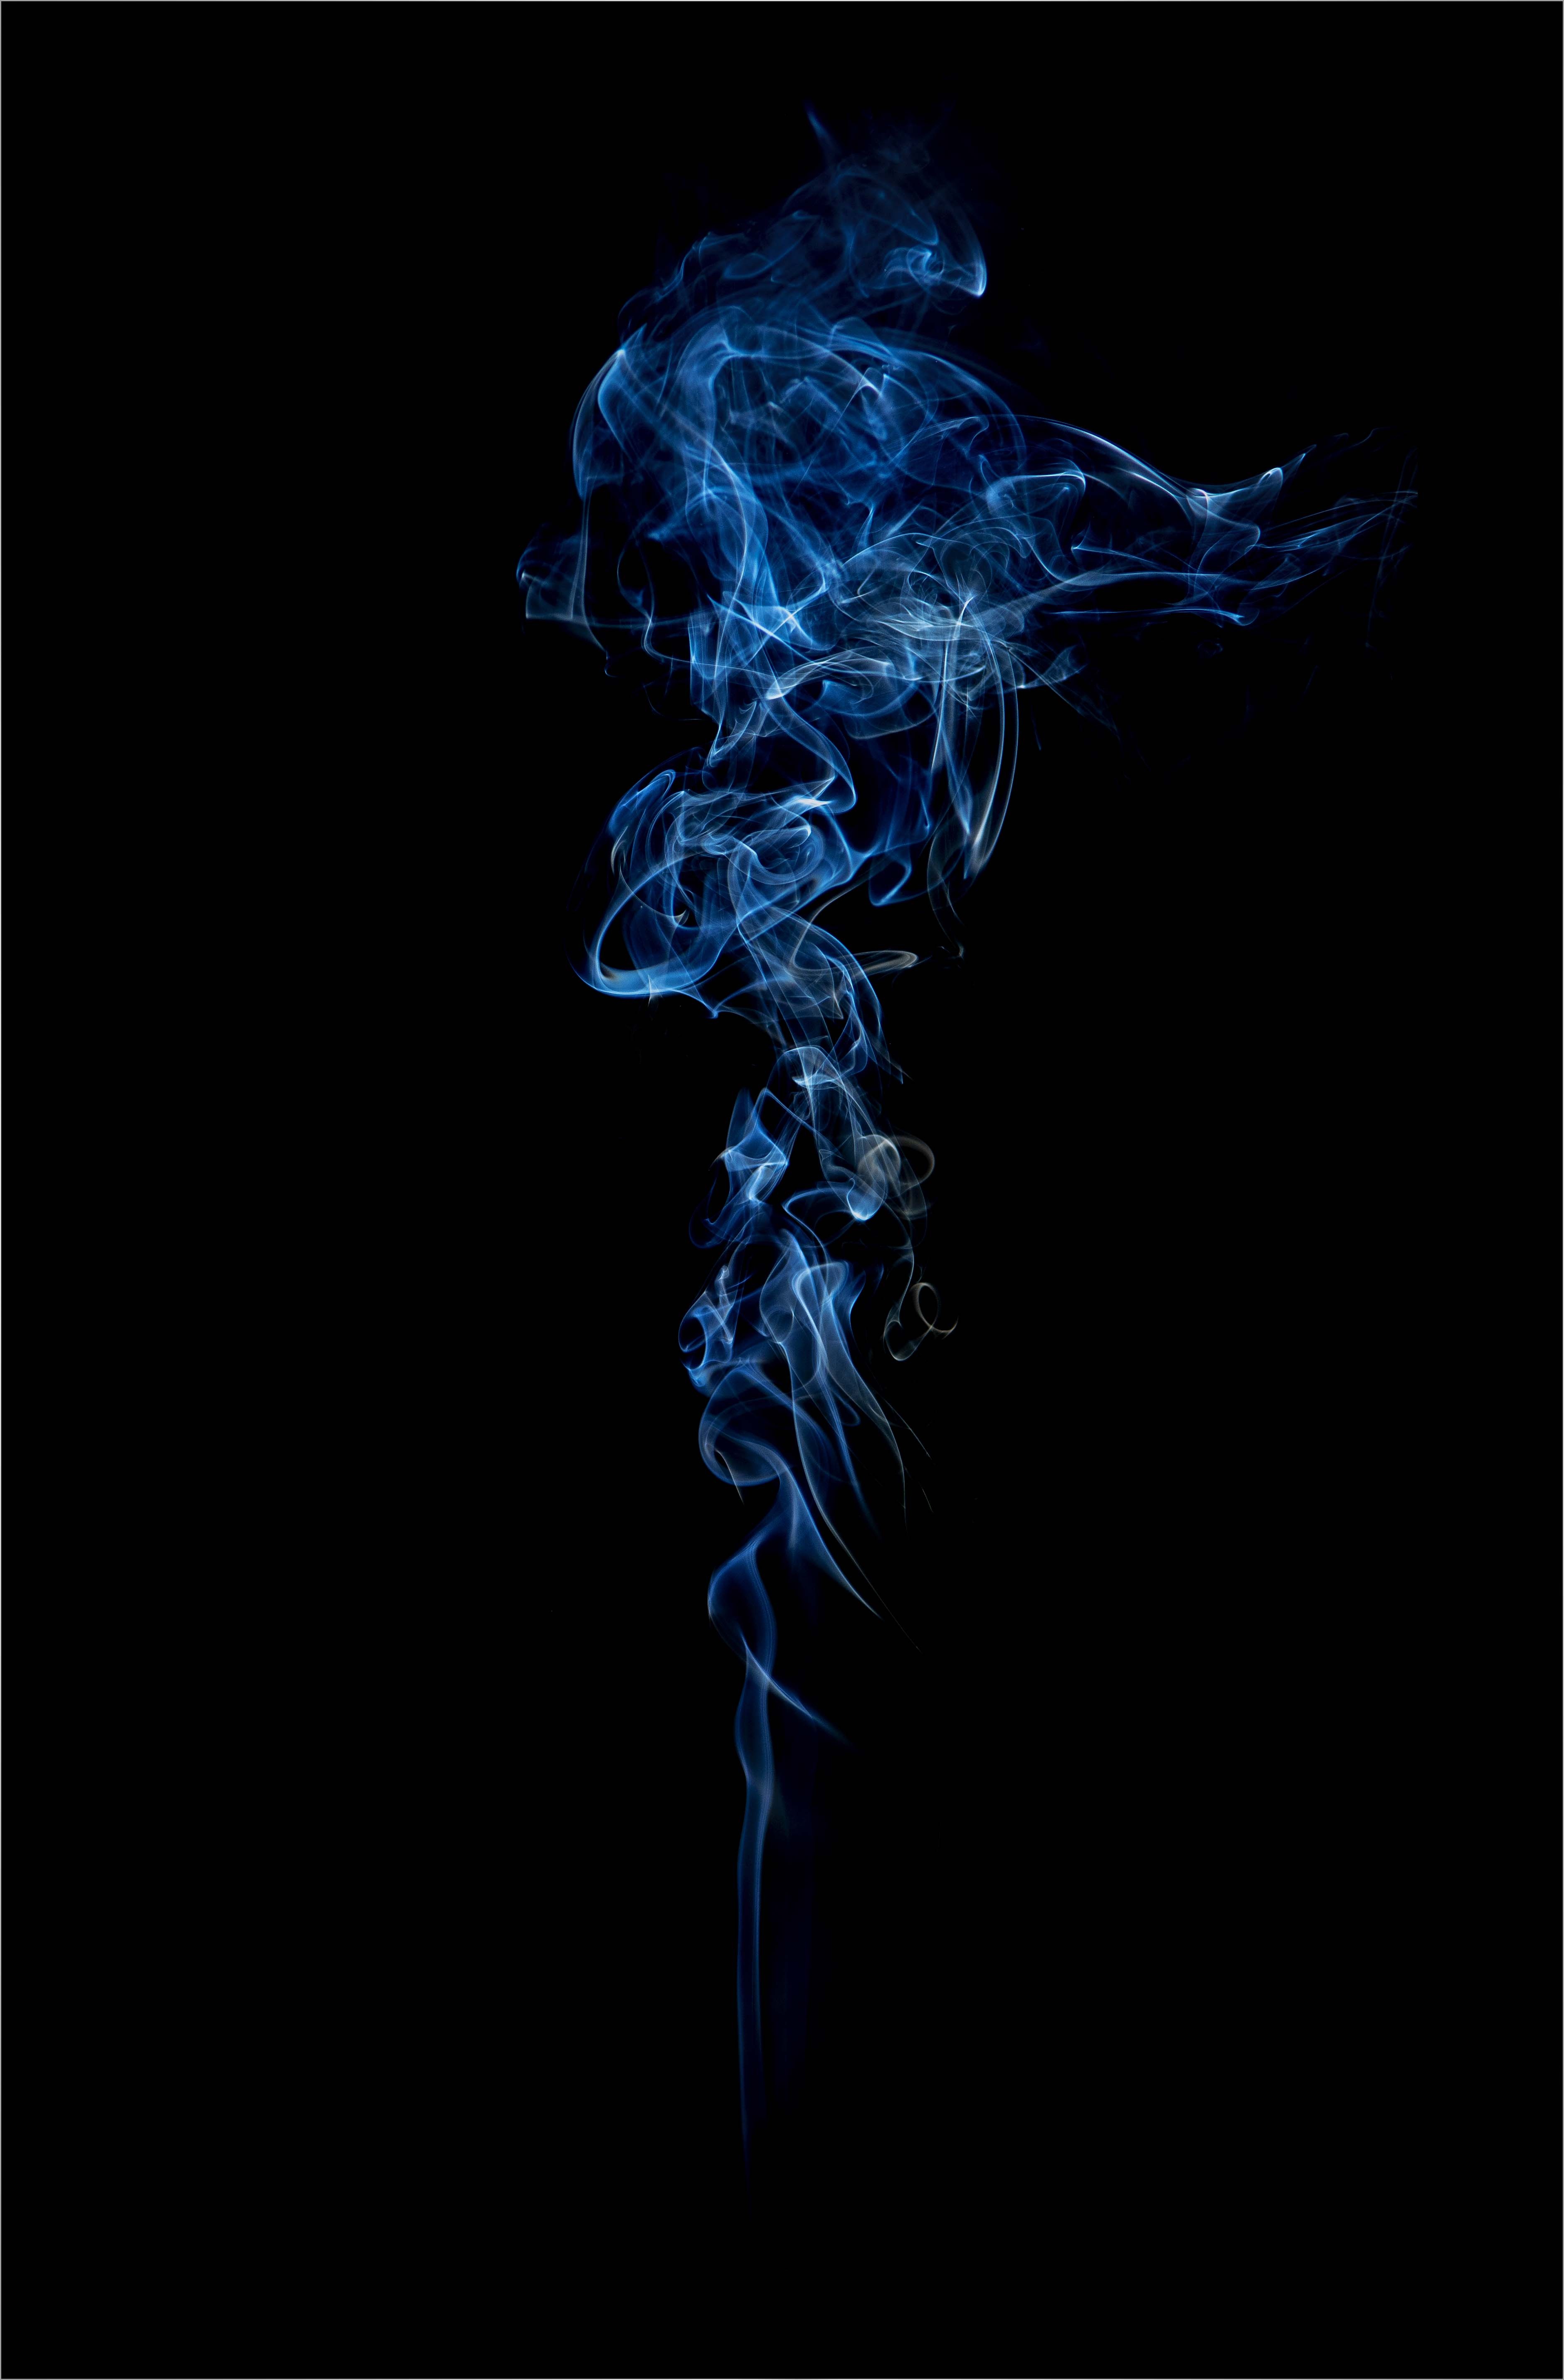 Mobile wallpaper: Dark, Clot, Shroud, Smoke, 100509 download the picture  for free.